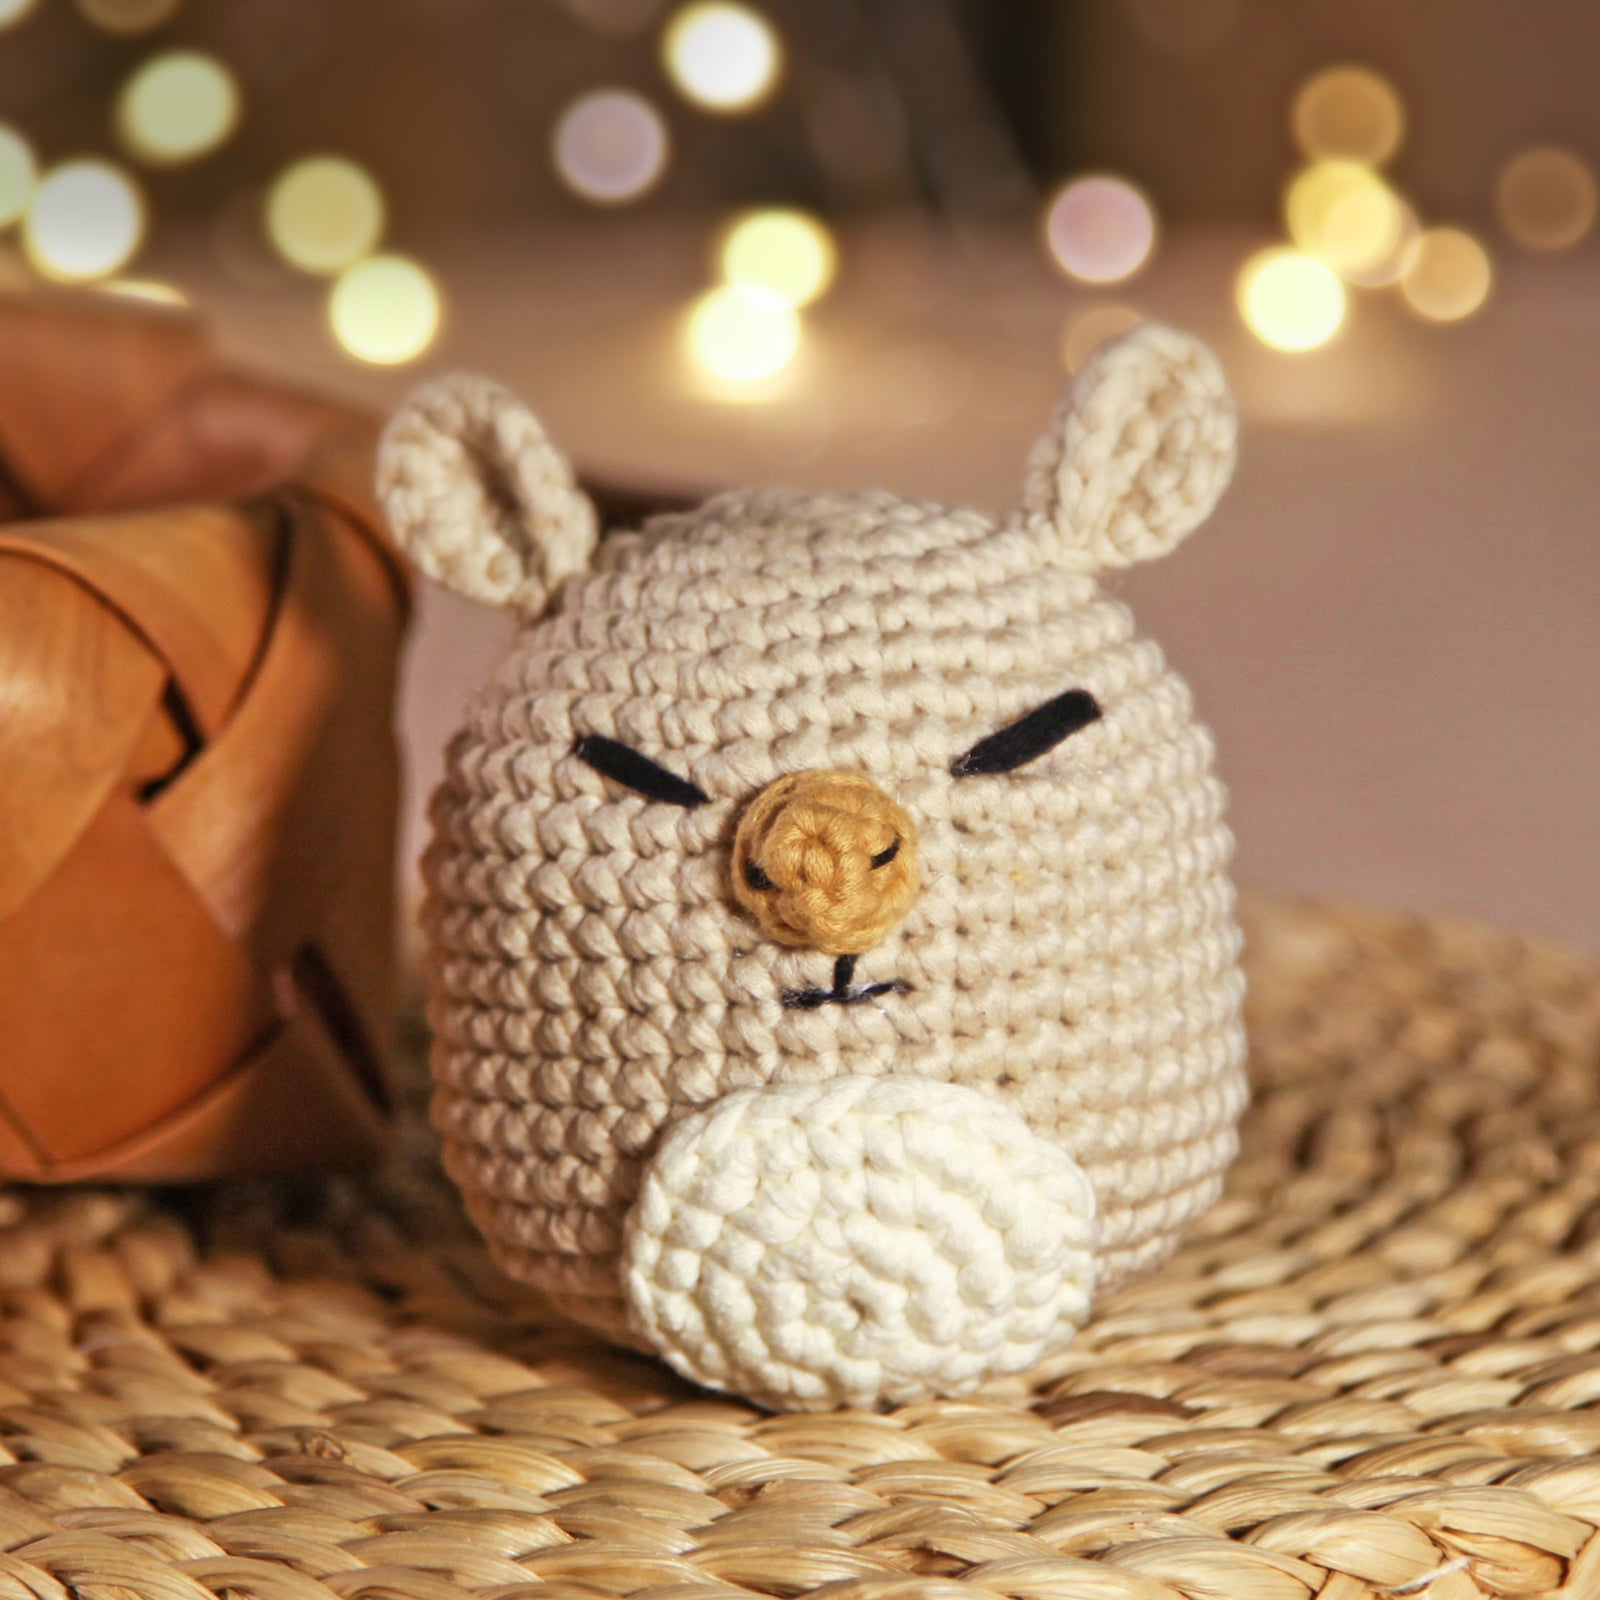 CrochetBox Crochet Kit for Beginners: Capybara Crochet Kit, Include Won't Split Yarn, Step-by-Step Video, Patterns, Cute Animal Design, Birthday, Holiday, Christmas Gift for Adults, Teens, Starters.